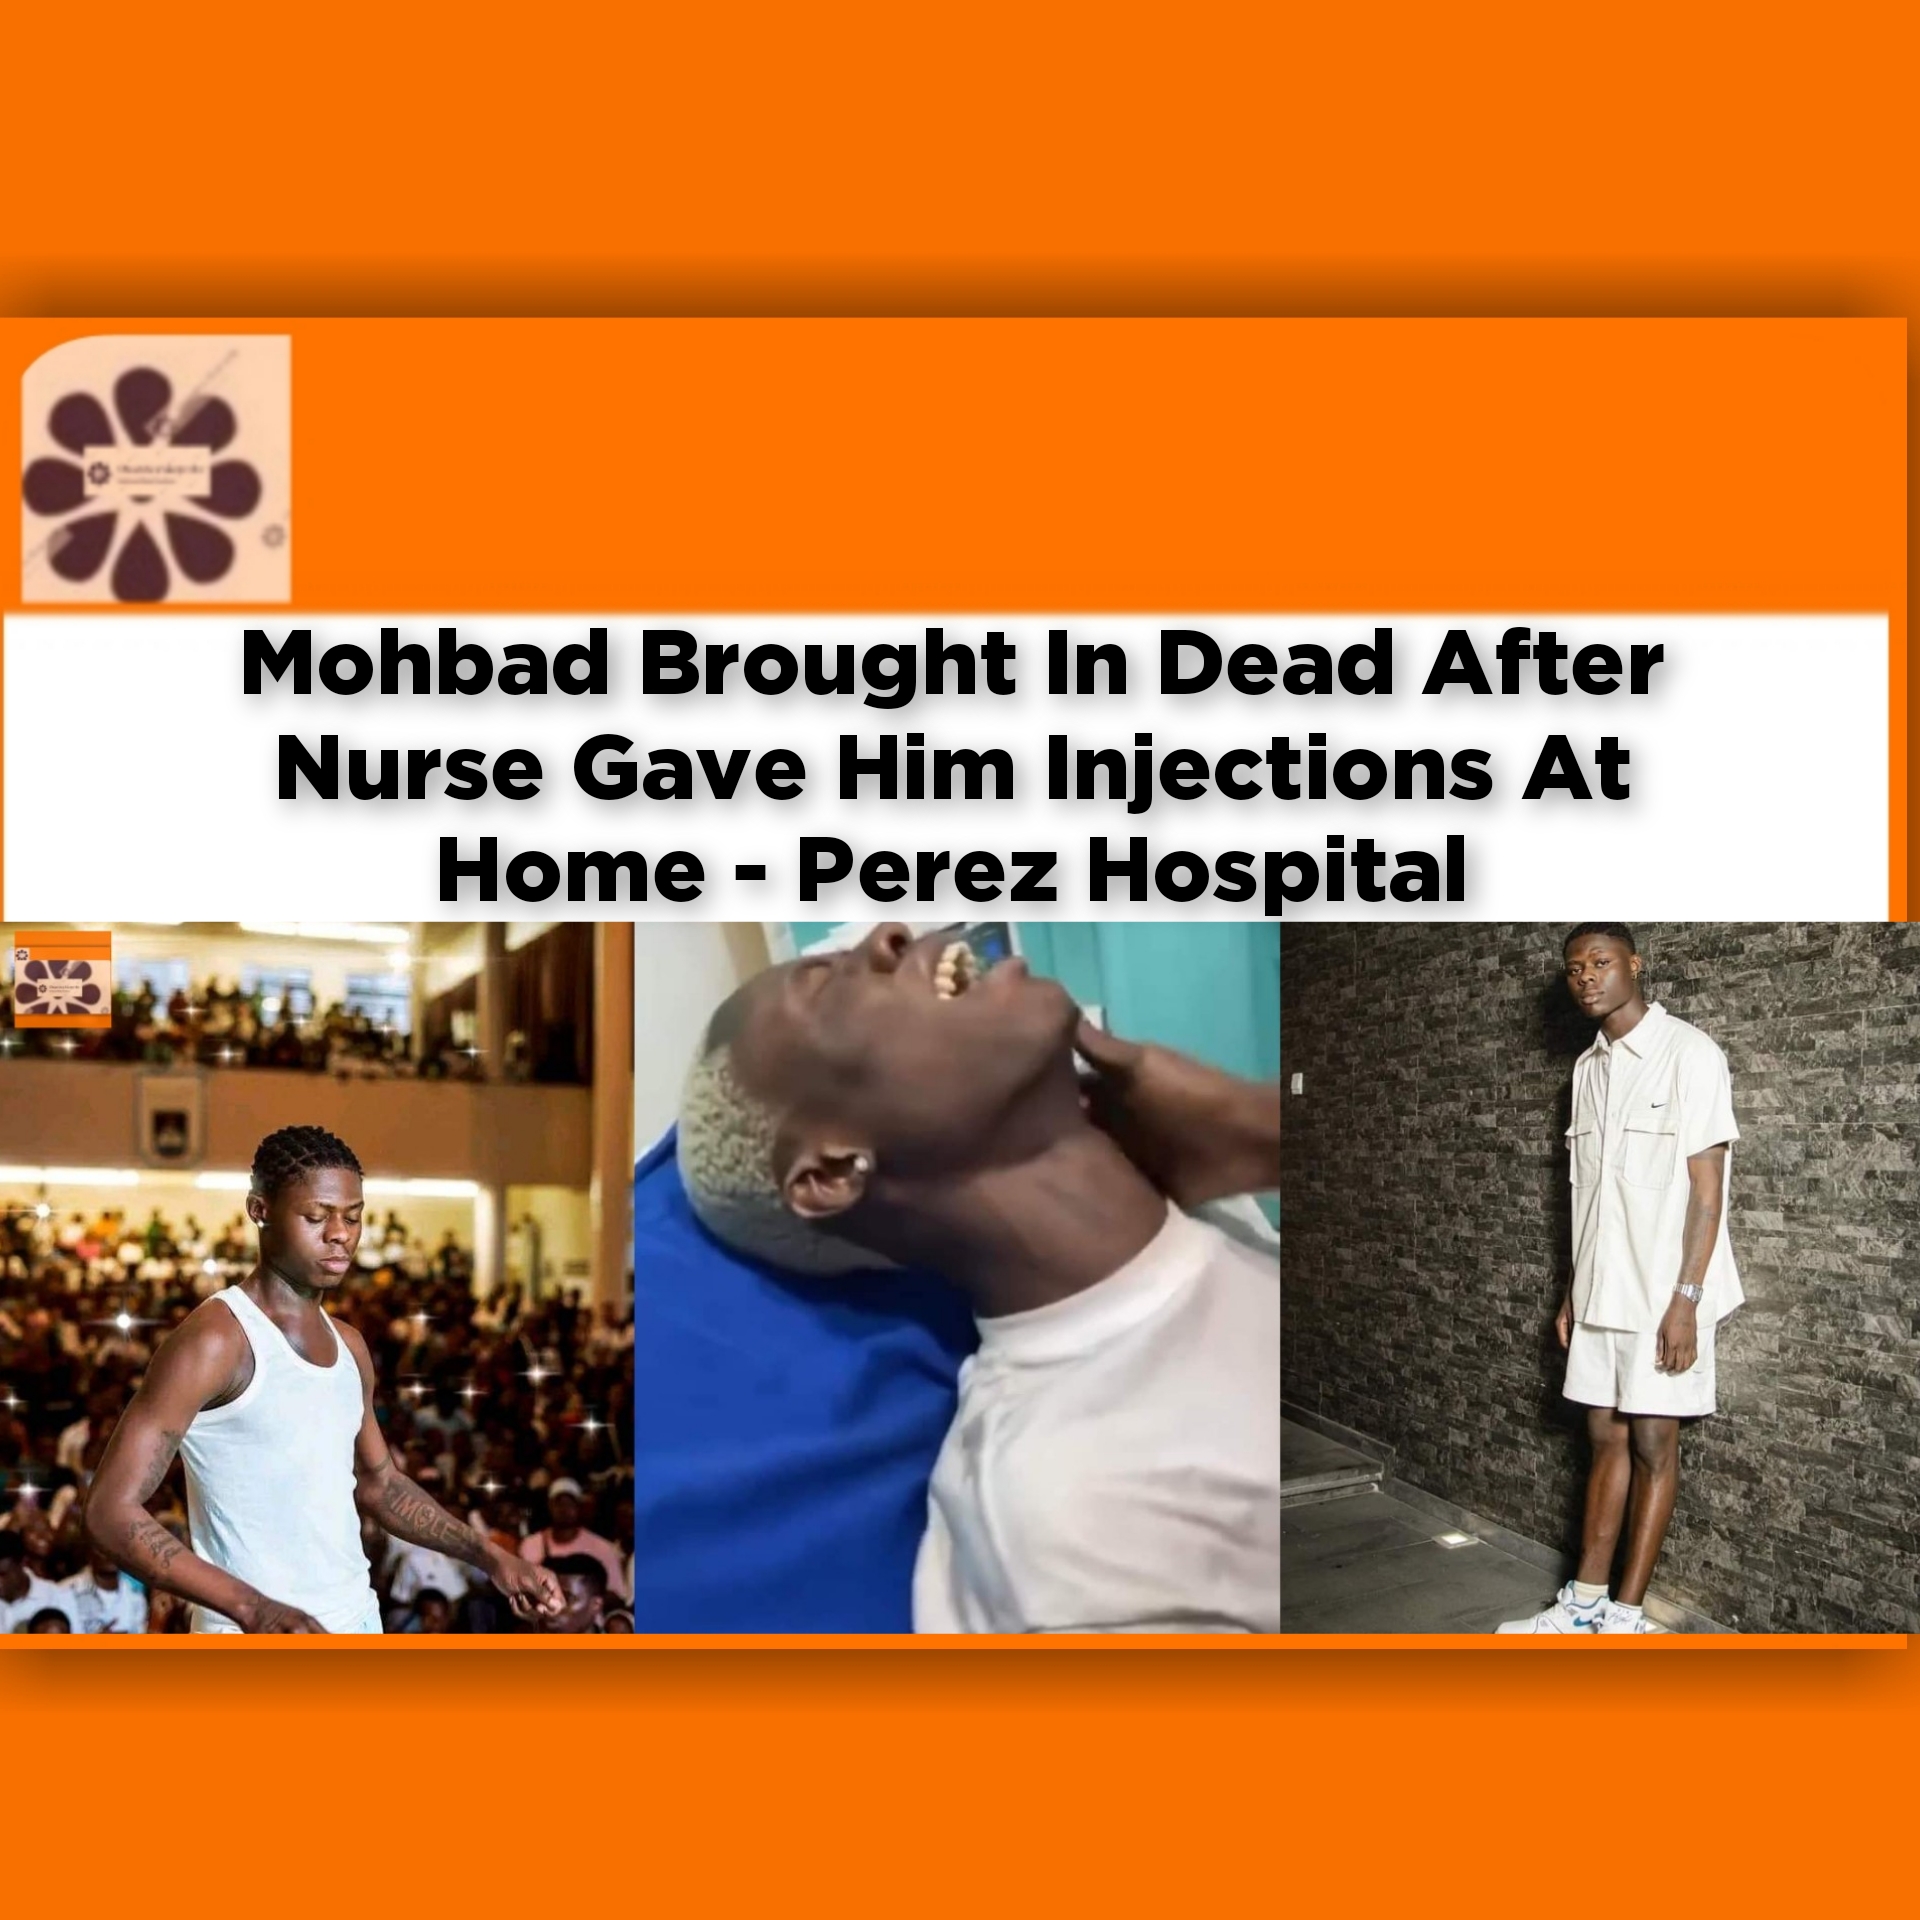 Mohbad Brought In Dead After Nurse Gave Him Injections At Home - Perez Hospital ~ OsazuwaAkonedo #Lagos #Mohbad #Perez Who We Are,OsazuwaAkonedo,Editorial Policy,Privacy Policy